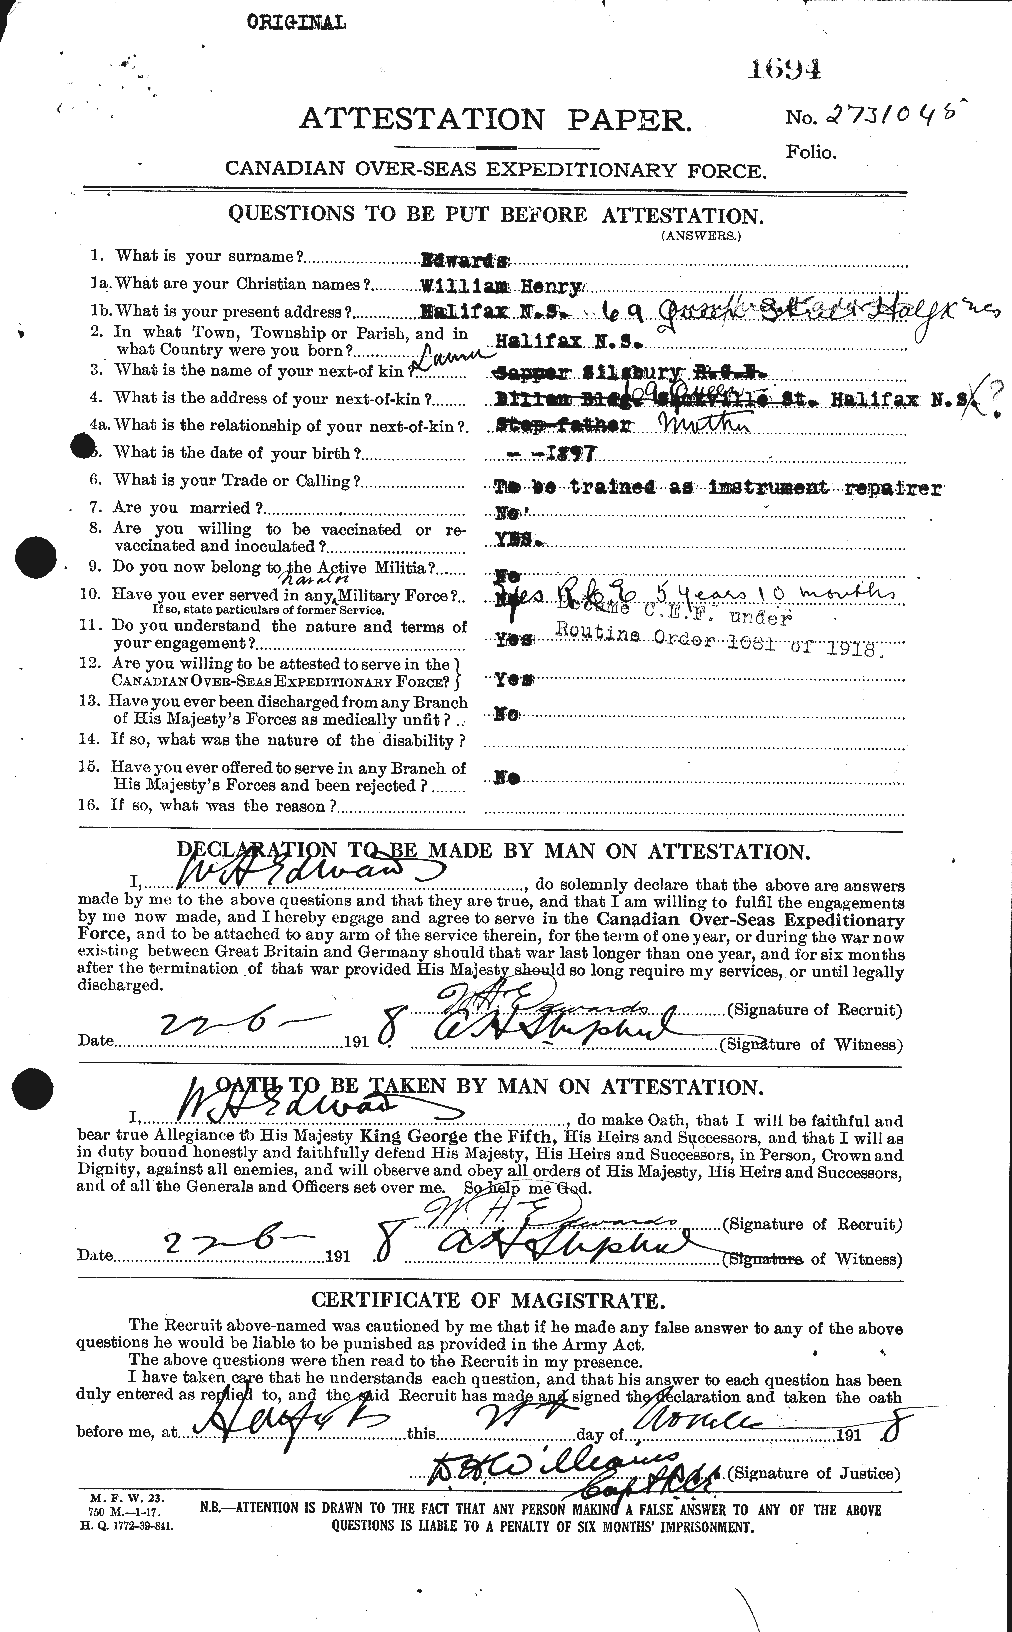 Personnel Records of the First World War - CEF 310433a